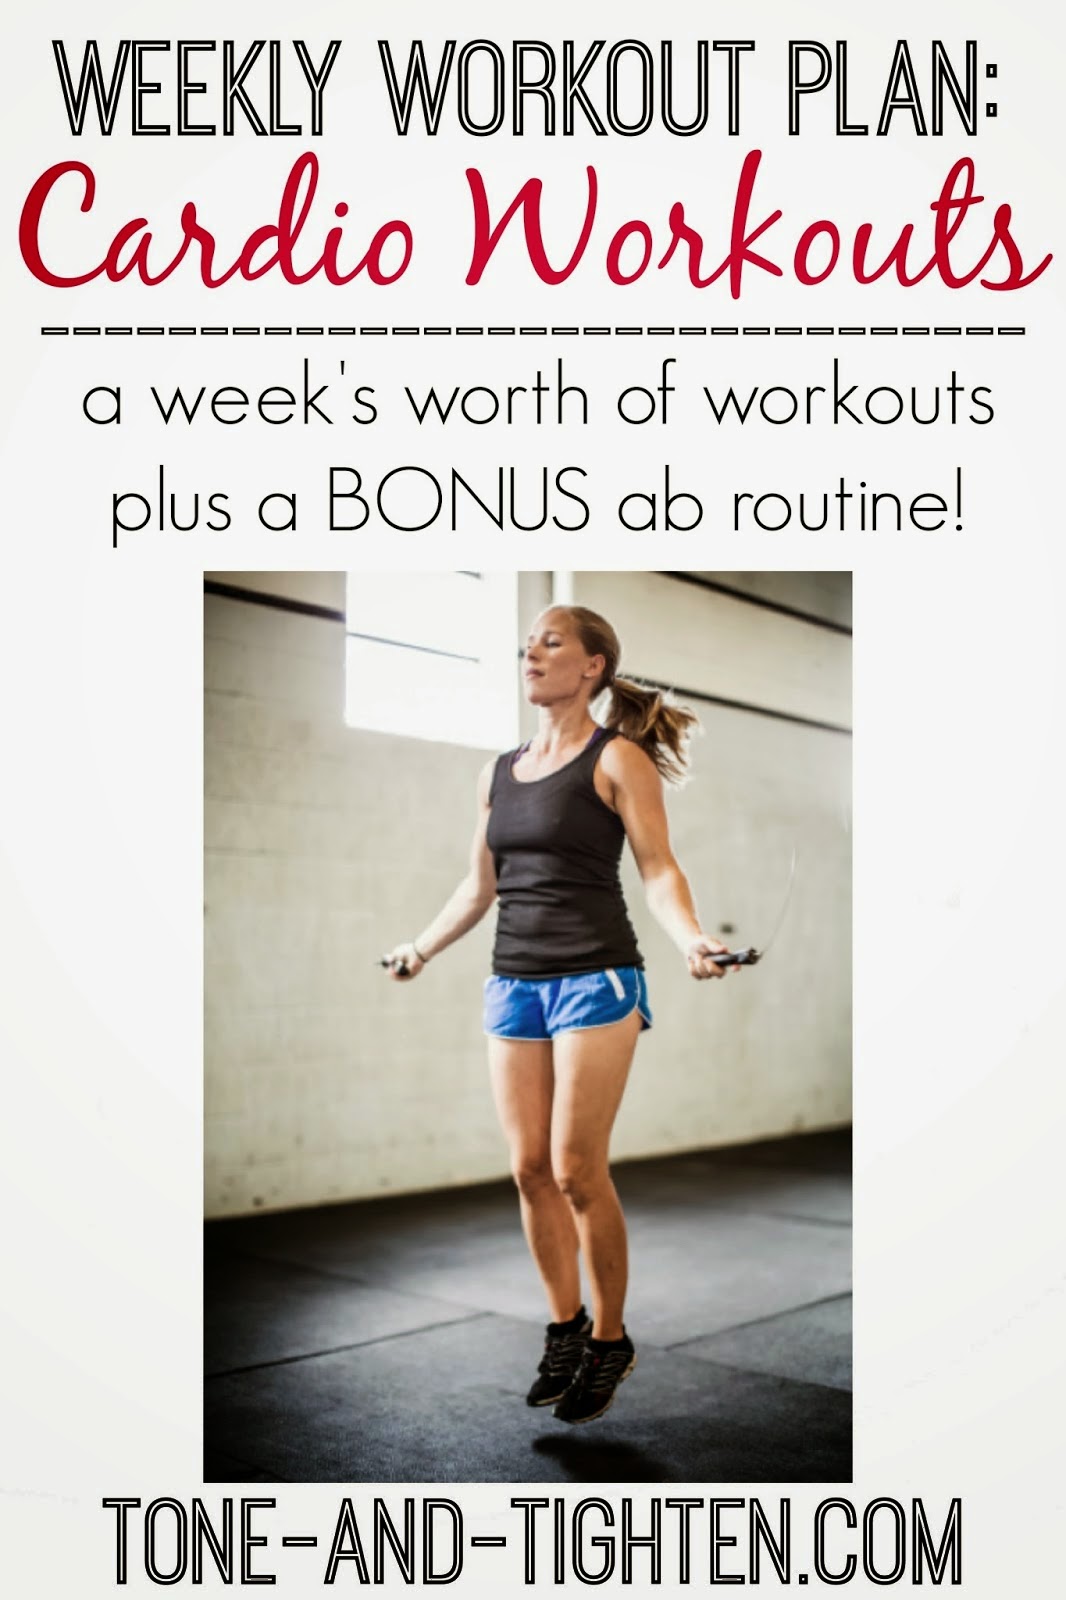 https://tone-and-tighten.com/2014/03/weekly-workout-plan-cardio-workouts-at-home.html